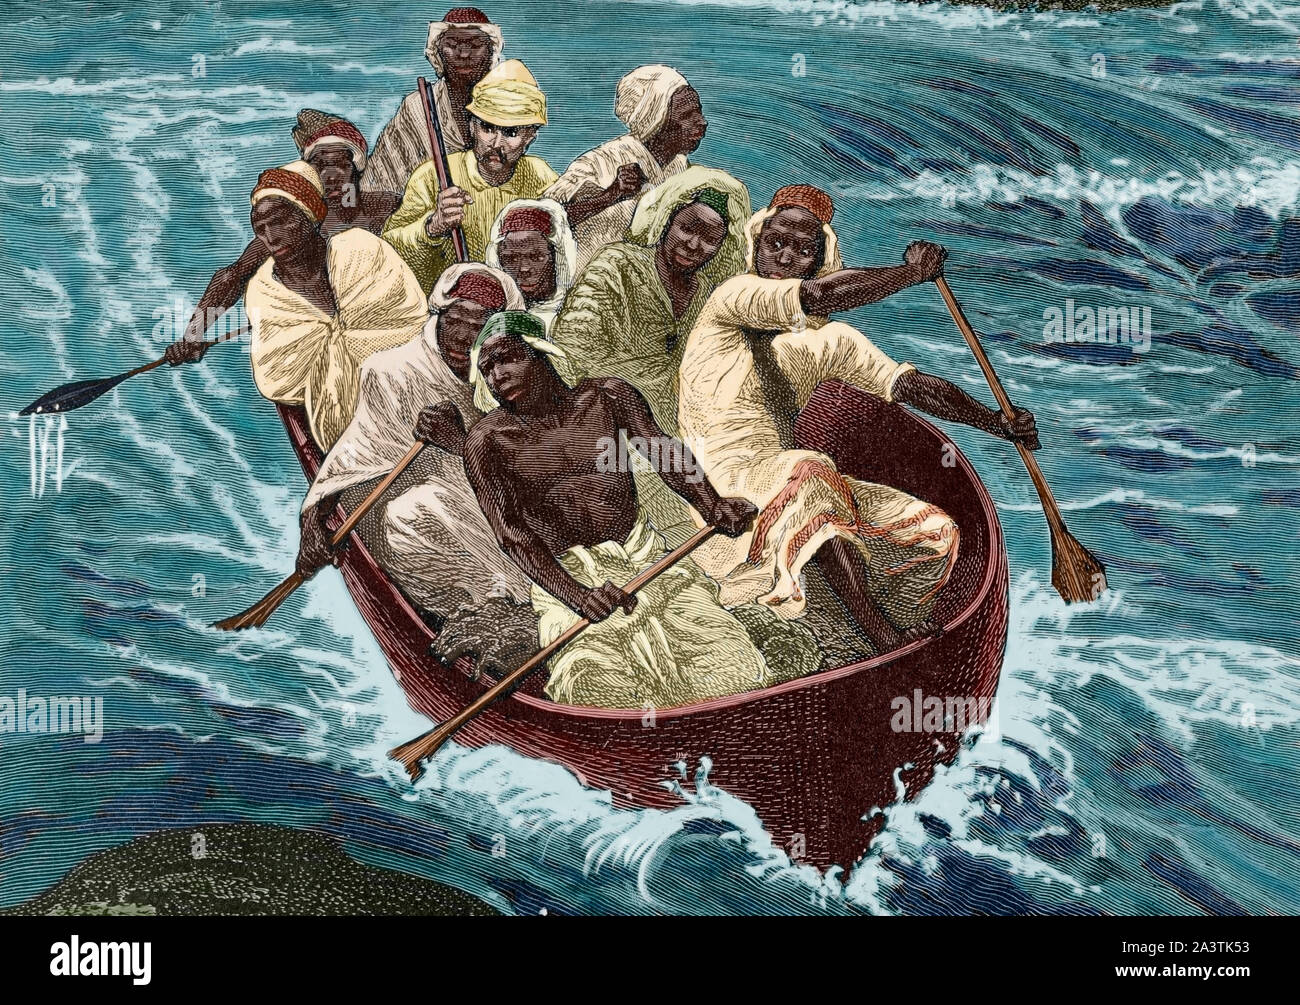 Africa. Stanley passes the Rapids of the Congo river in the canoe 'Lady Alice' (at present Democratic Republic of the Congo). Engraving. Africa inexplorada, el Continente Misterioso by Henry Morton Stanley, c. 1887. Later colouration. Stock Photo